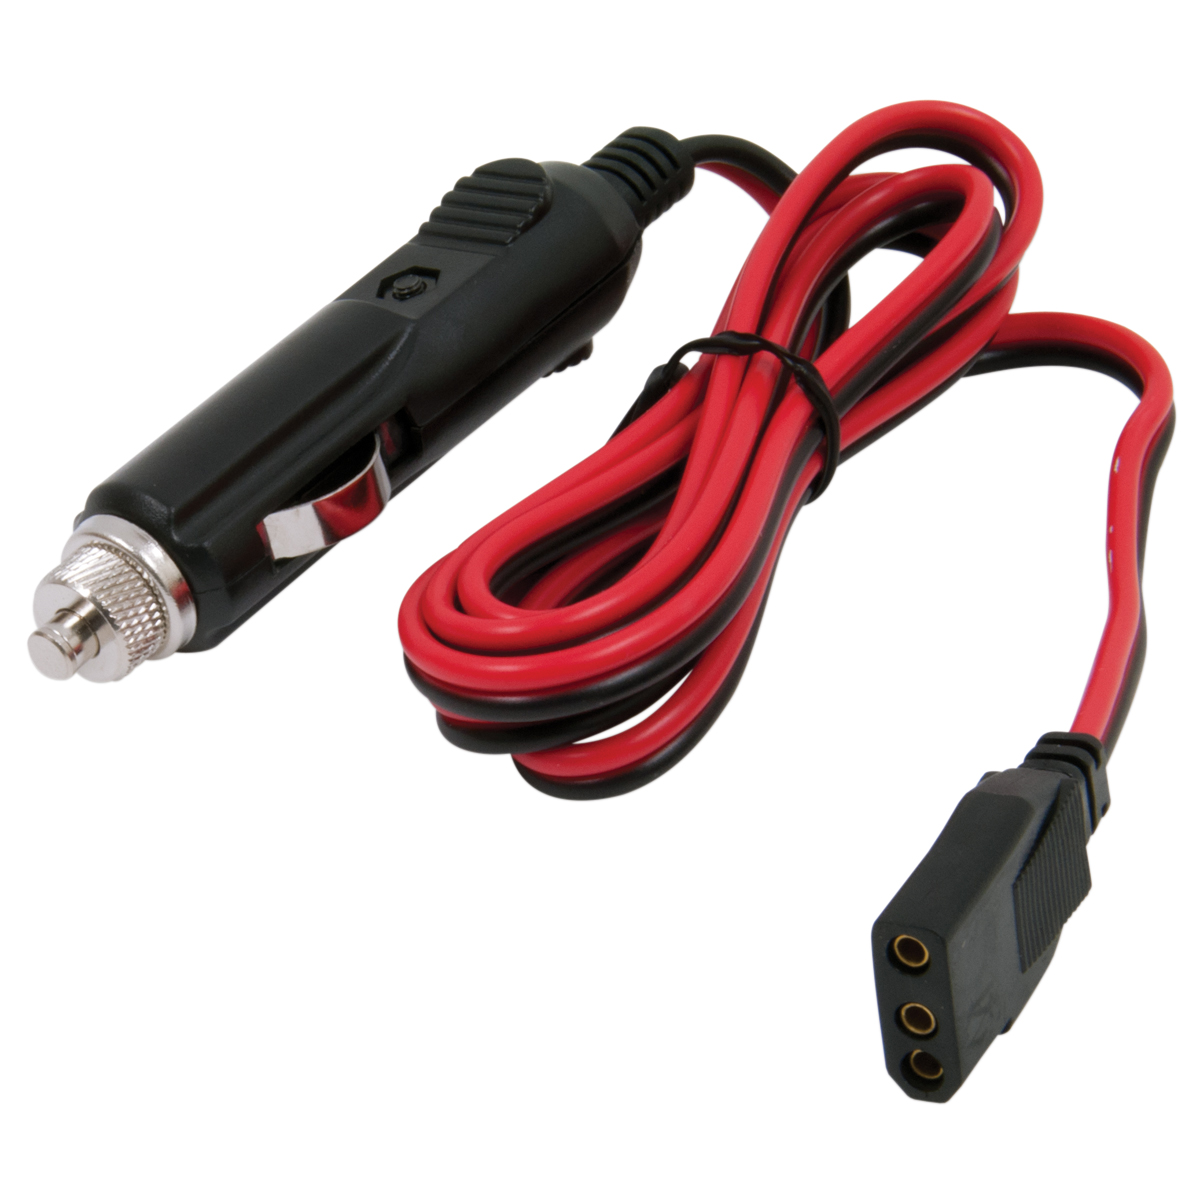 RoadPro RPPSCBH-3CP Platinum Series 3-Wire 3-Pin Plug/12V Plug Fused Replacement CB Power Cord 